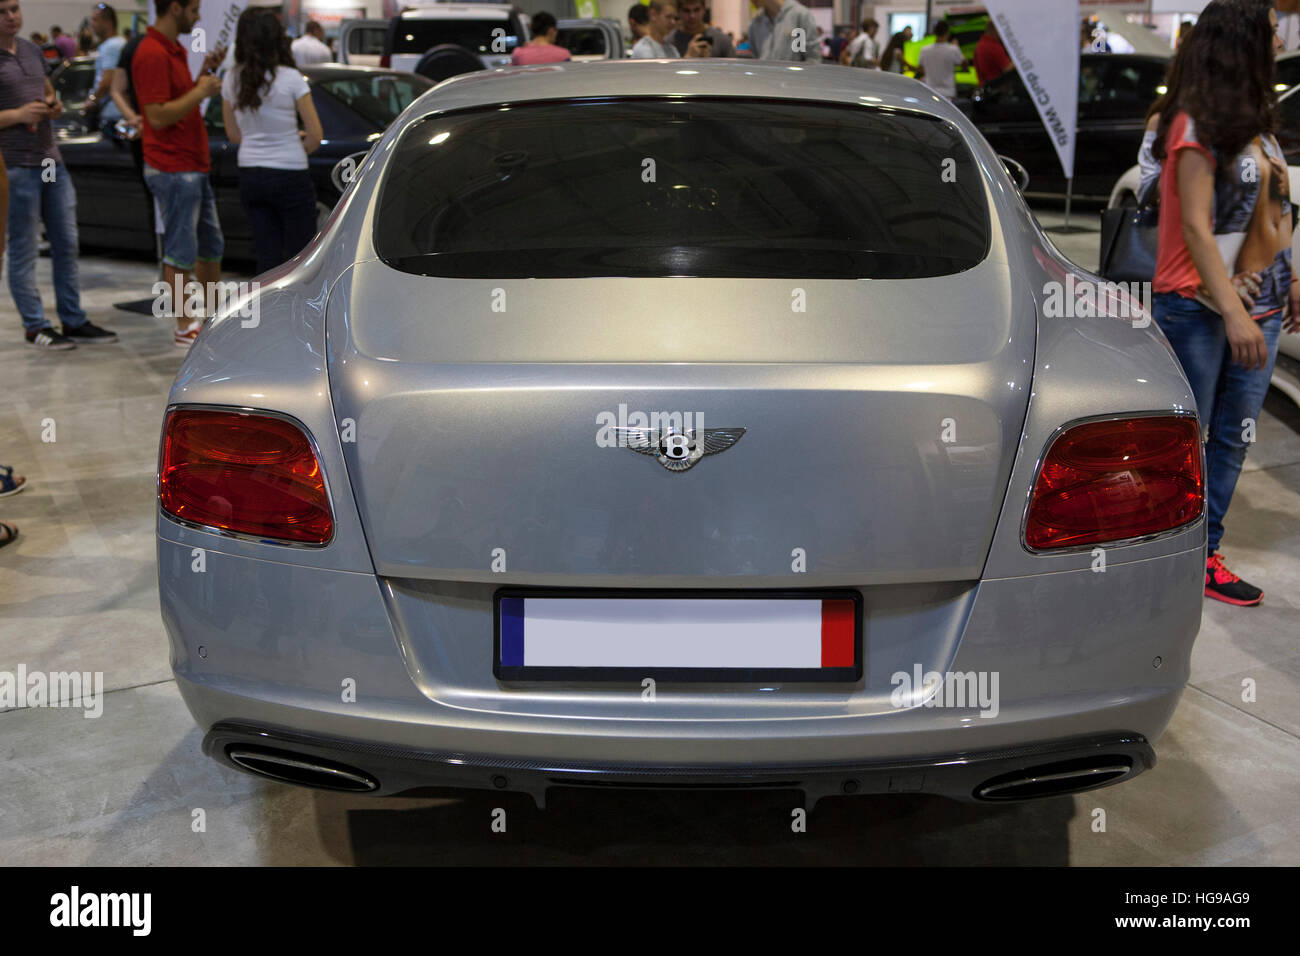 Car tuning show, back view Stock Photo